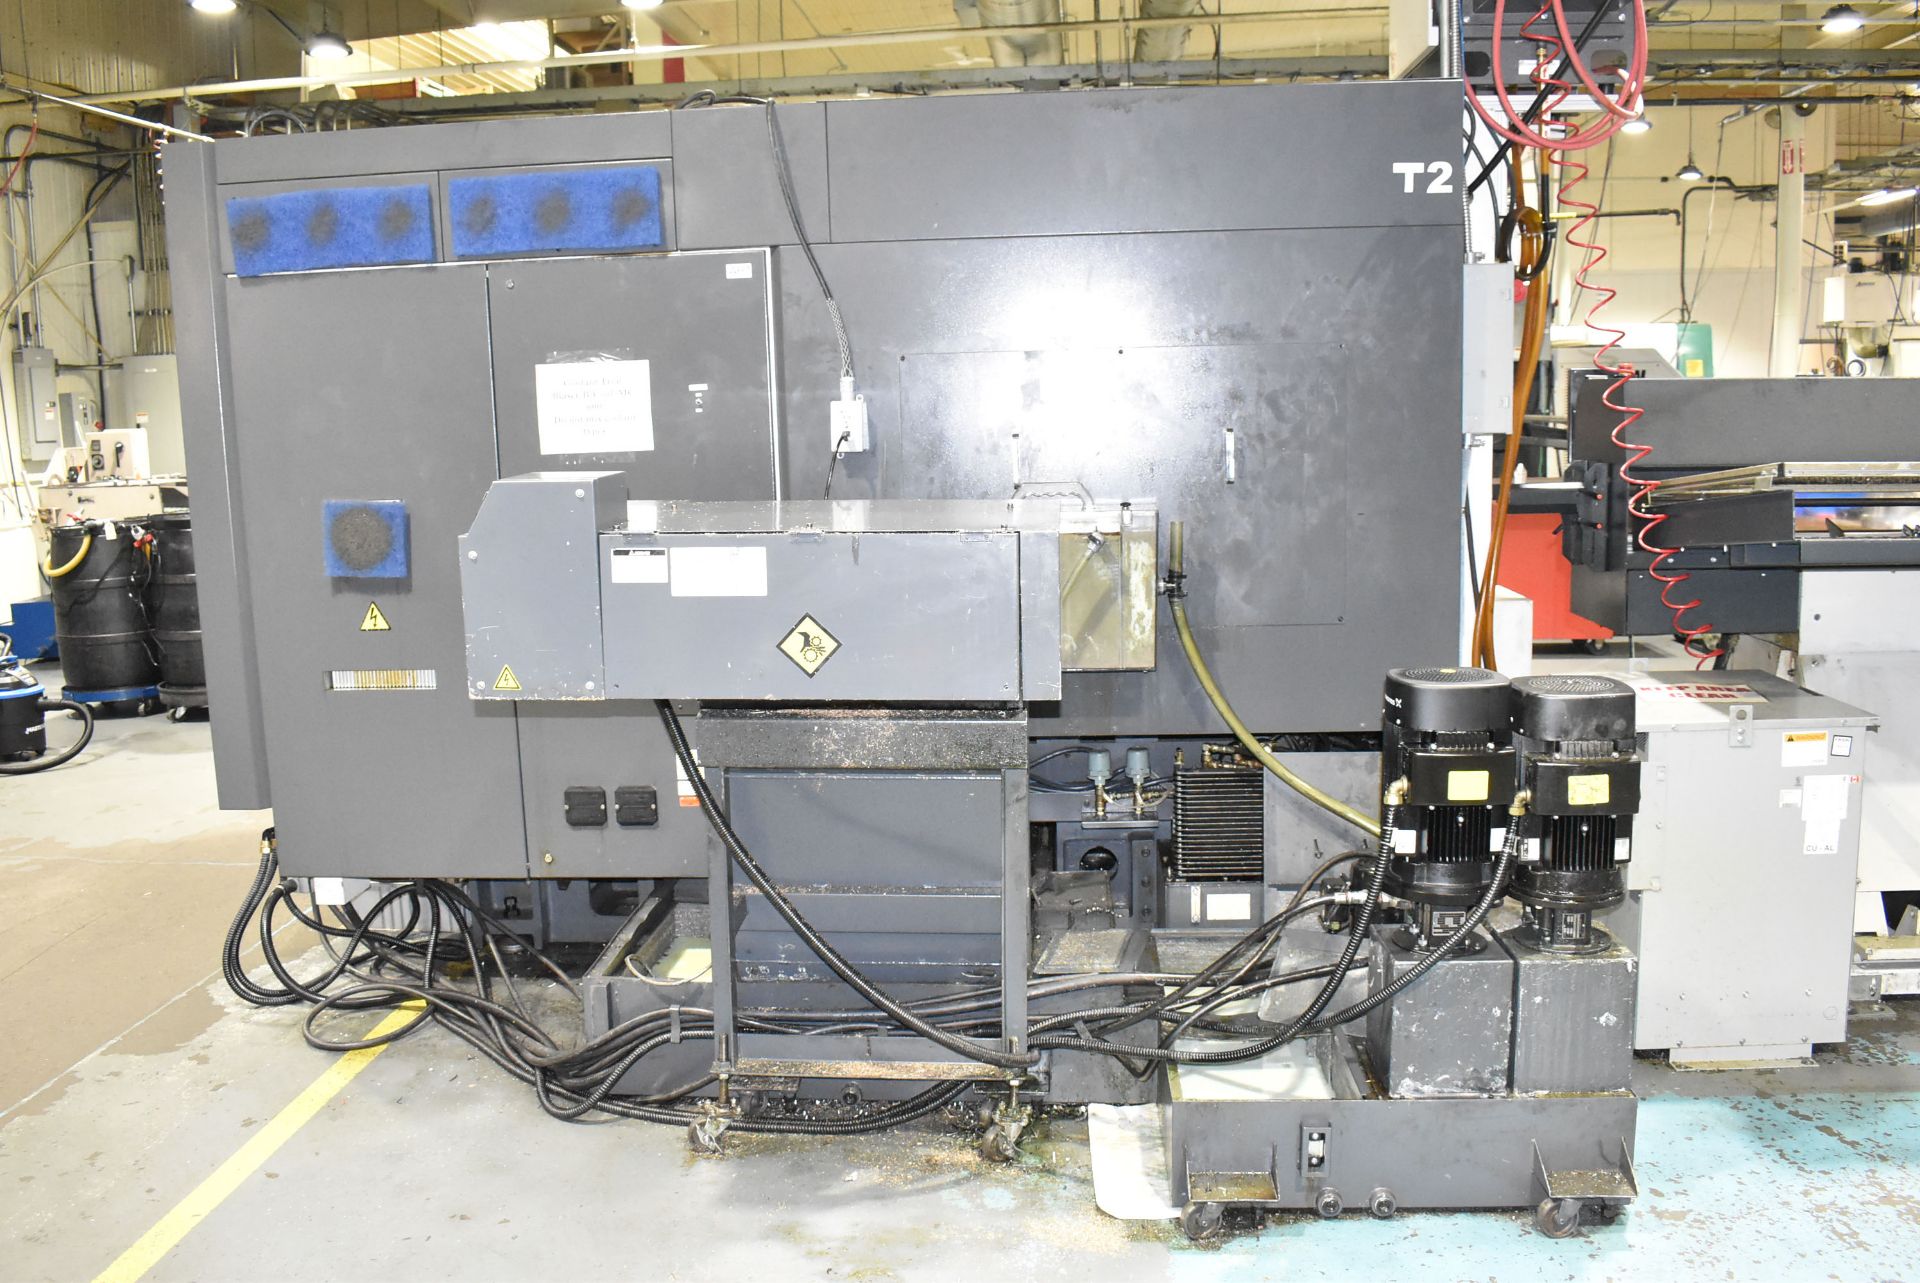 NAKAMURA-TOME (2013) WT-250 II S MULTI-AXIS OPPOSED SPINDLE AND TWIN TURRET CNC MULTI-TASKING CENTER - Image 10 of 21